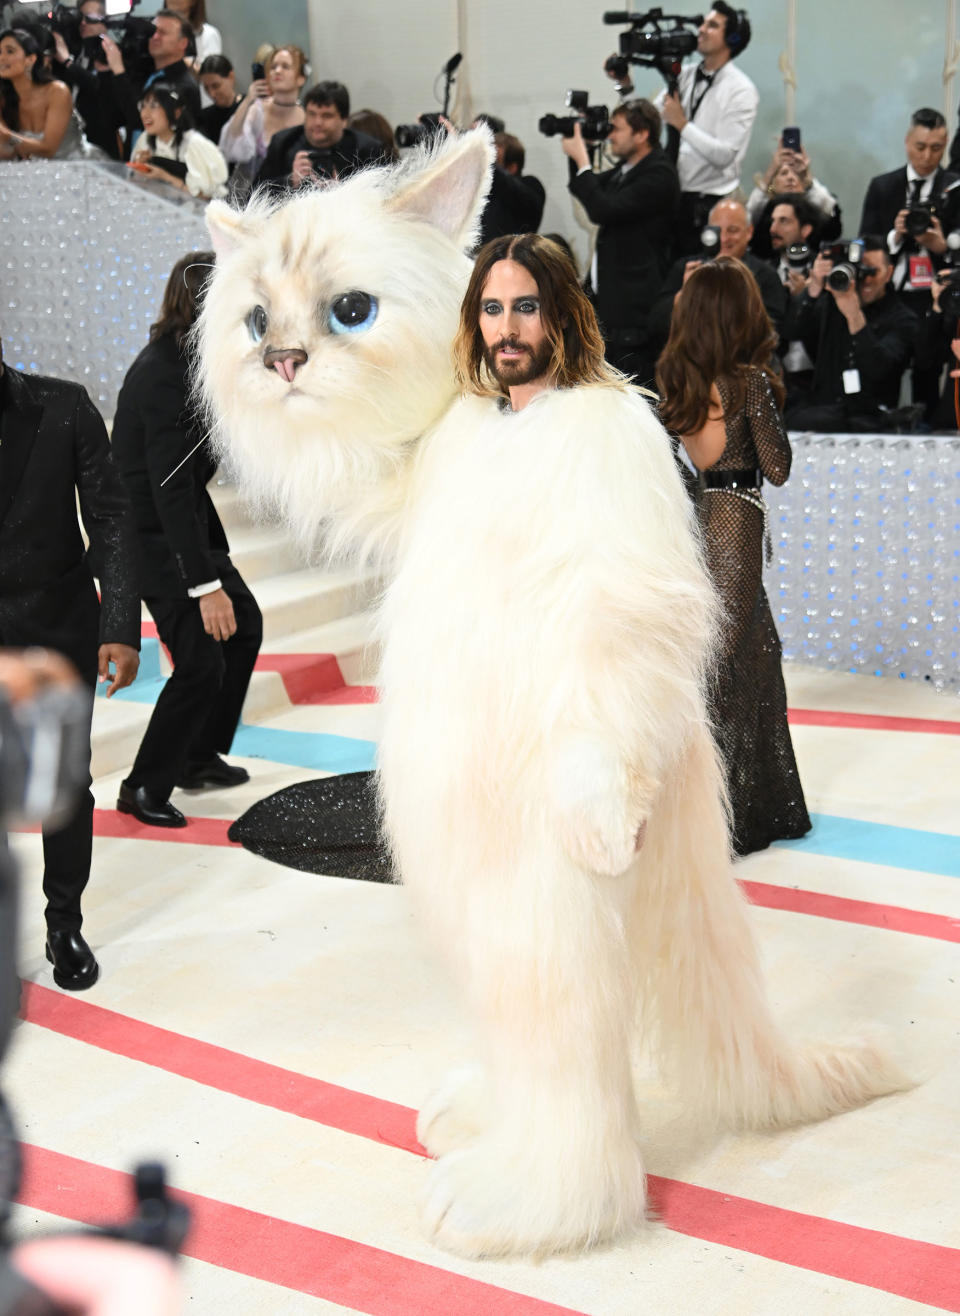 Jared Leto<span class="copyright">Noam Galai—GA/The Hollywood Reporter/Getty Images</span>